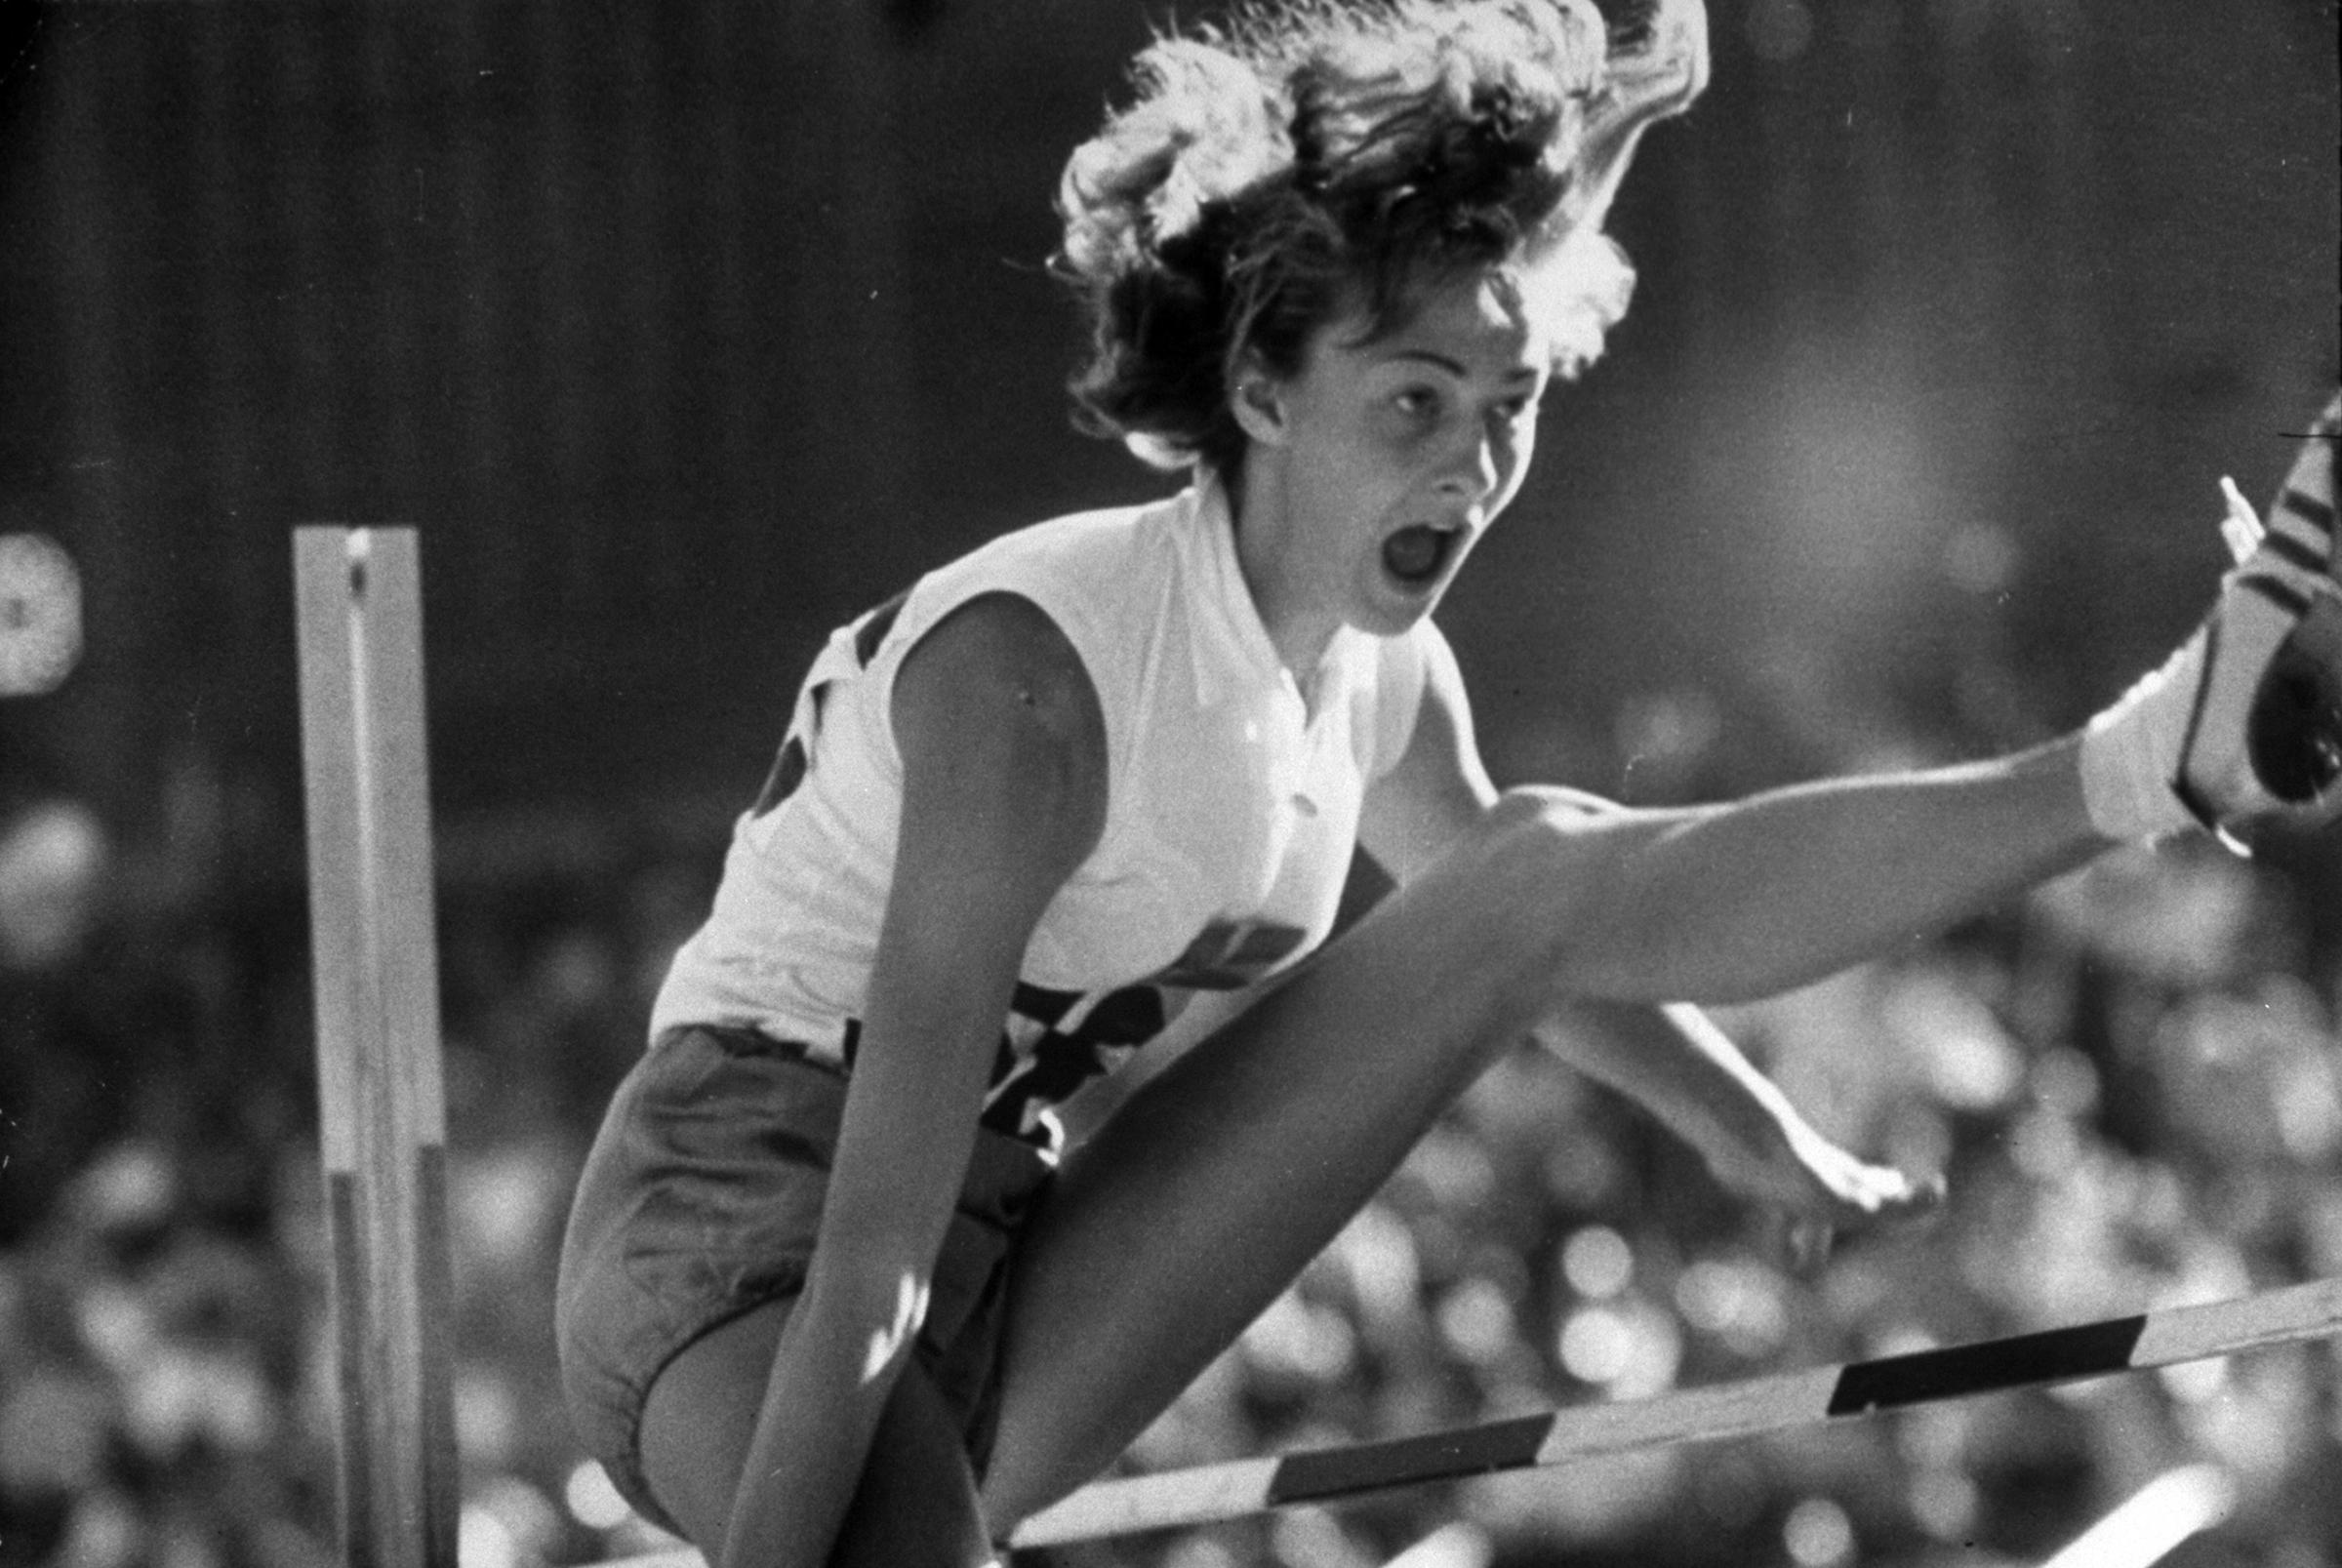 Gunhild Larking, Sweden's entry for the high jump, clearing the high bar during the 1956 summer Olympics in Melbourne, Australia.